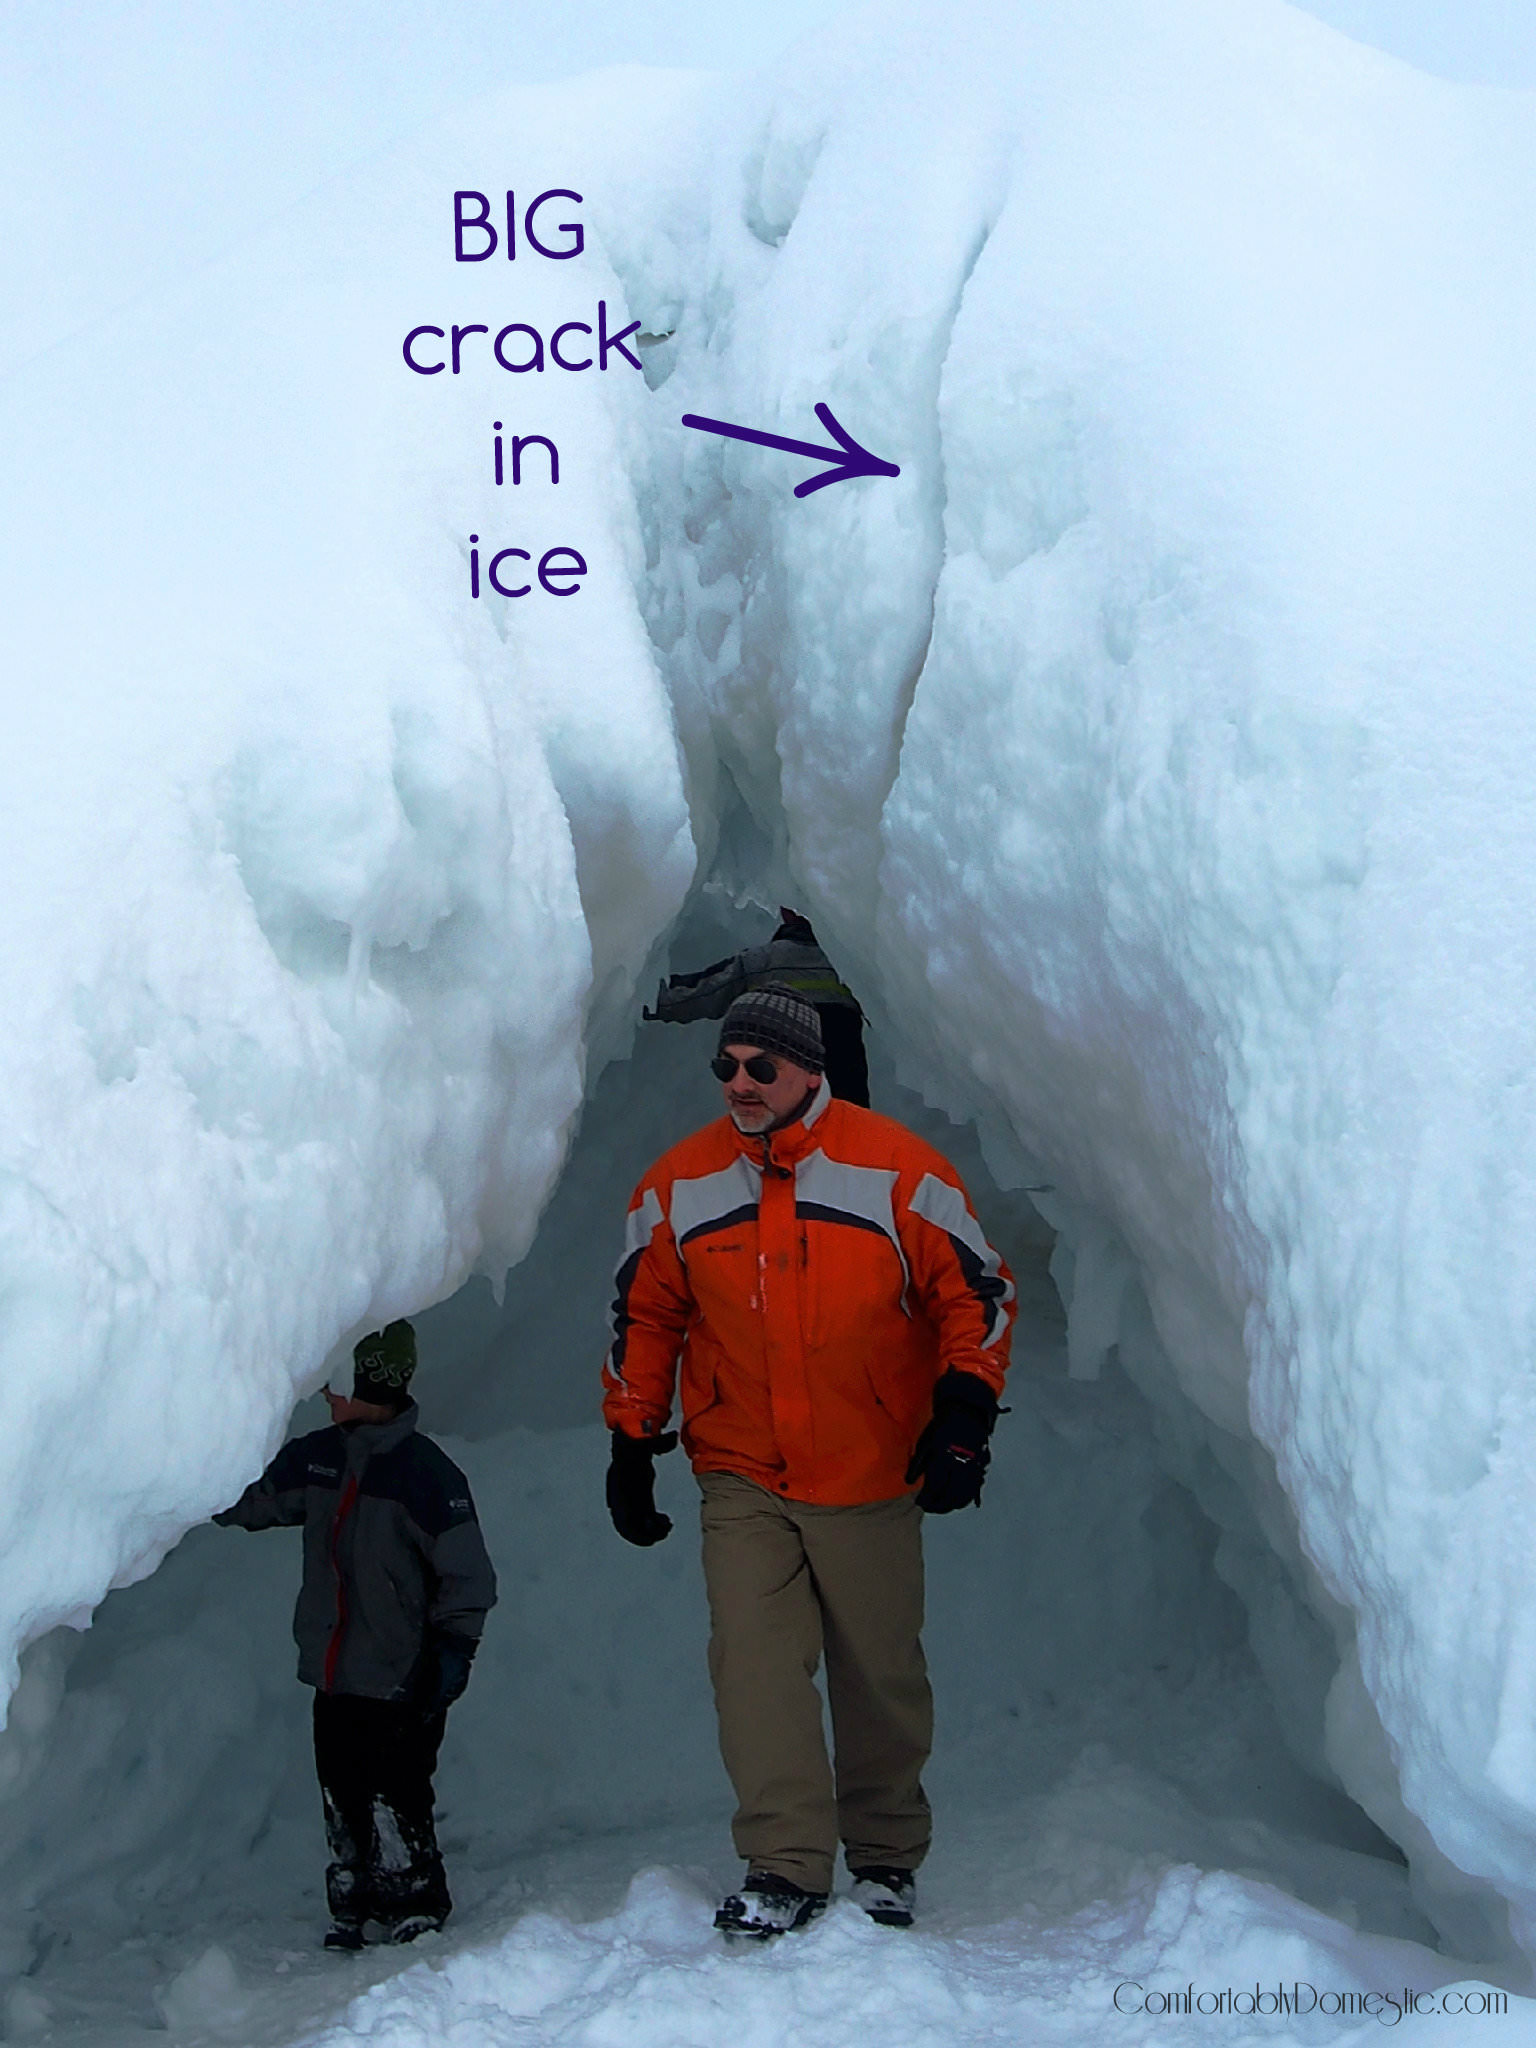 Eek! An fissure in the ice!